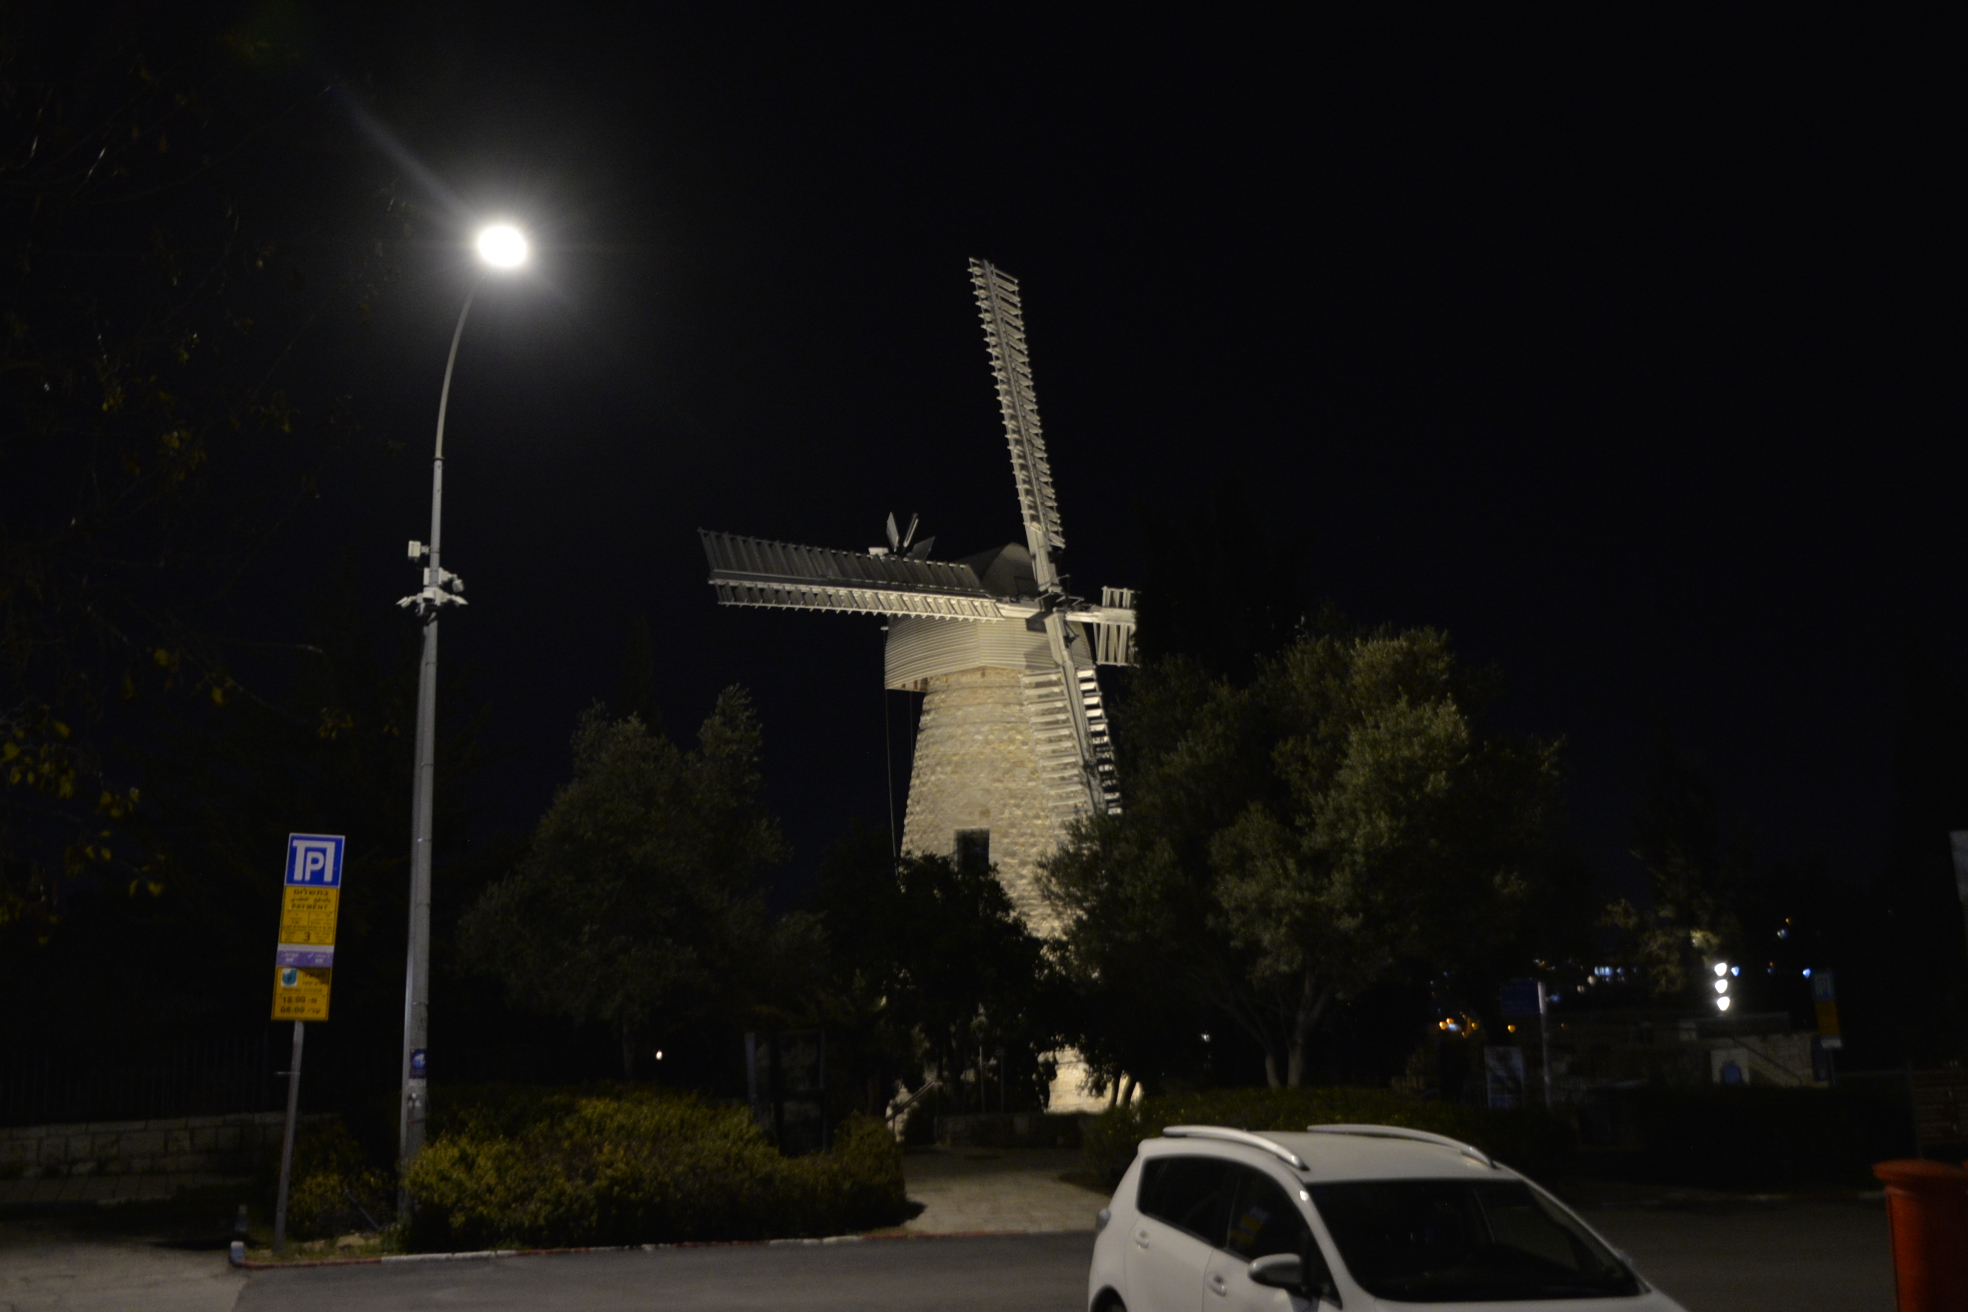 After dinner some of us walked around our Jerusalem neighborhood to see local landmarks, such as Montefiore's windmill.